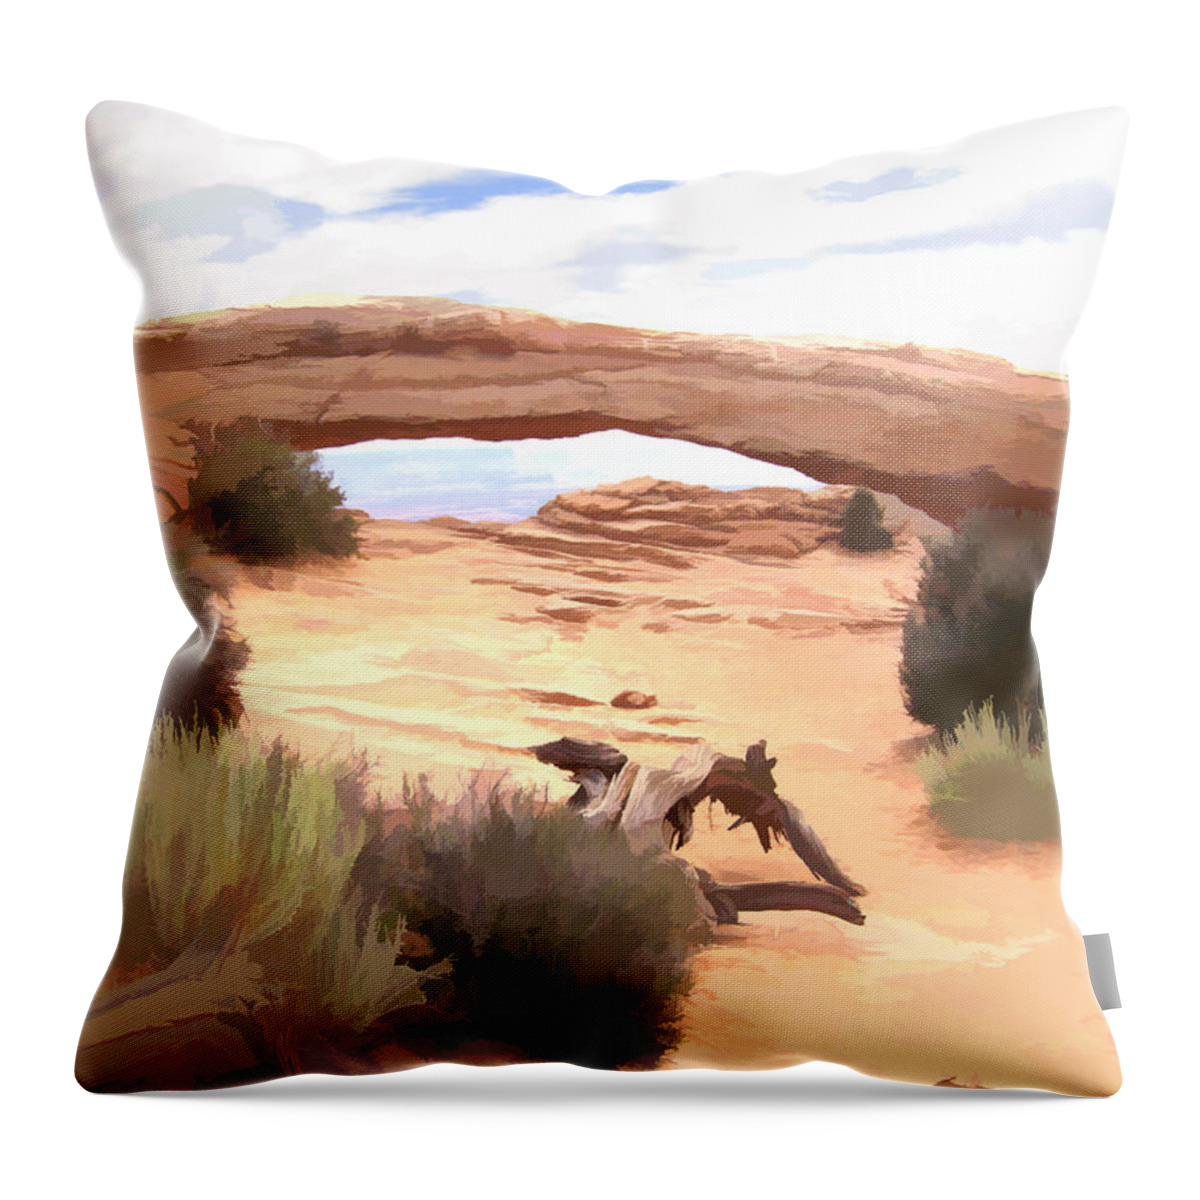 Window Throw Pillow featuring the digital art Window On The Valley by Gary Baird